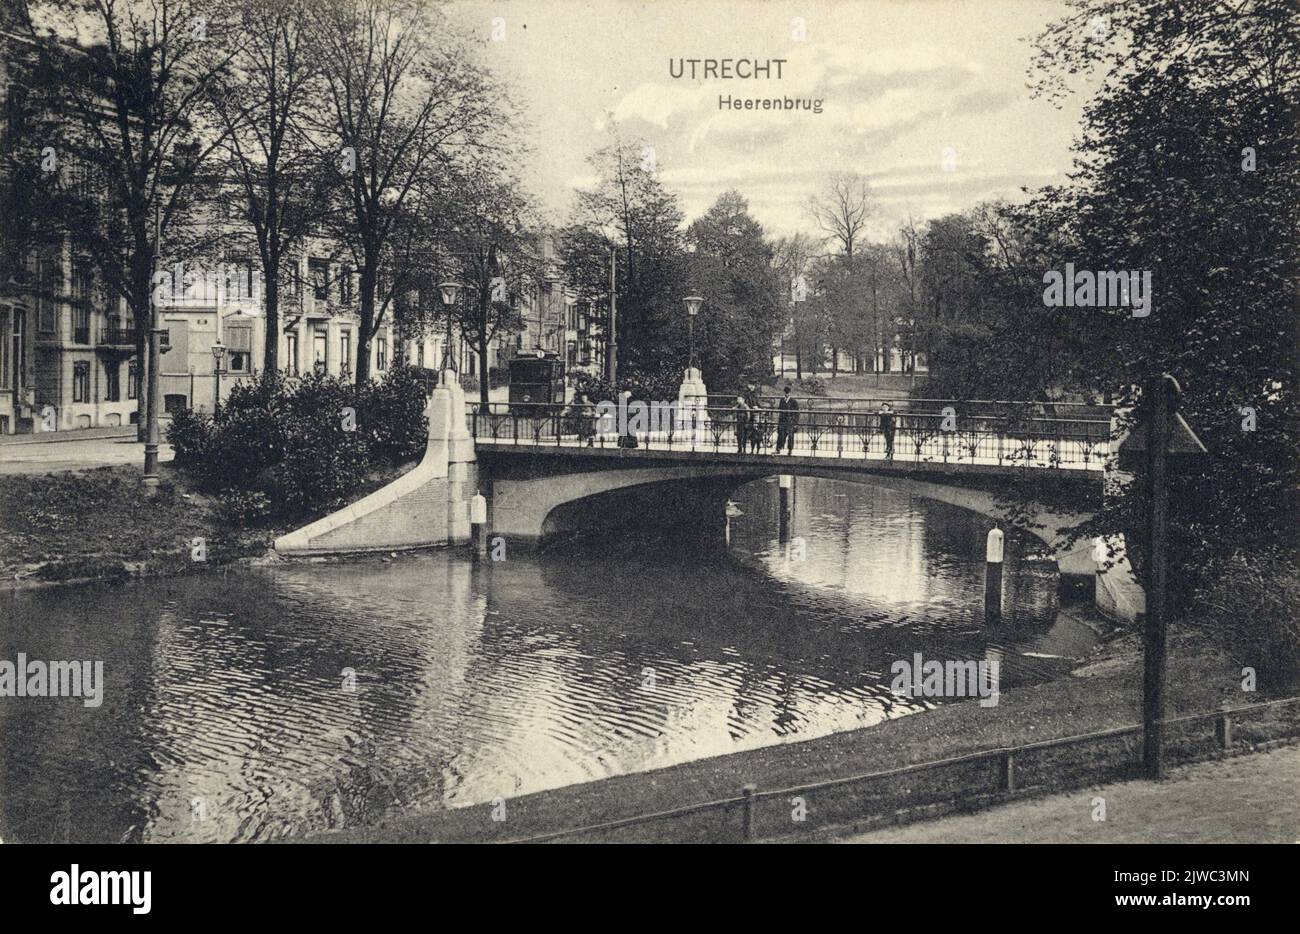 View of the Stadsbuitengracht in Utrecht with on the left the facades of a few houses on the Maliesingel and on the right the Herenbrug. Stock Photo